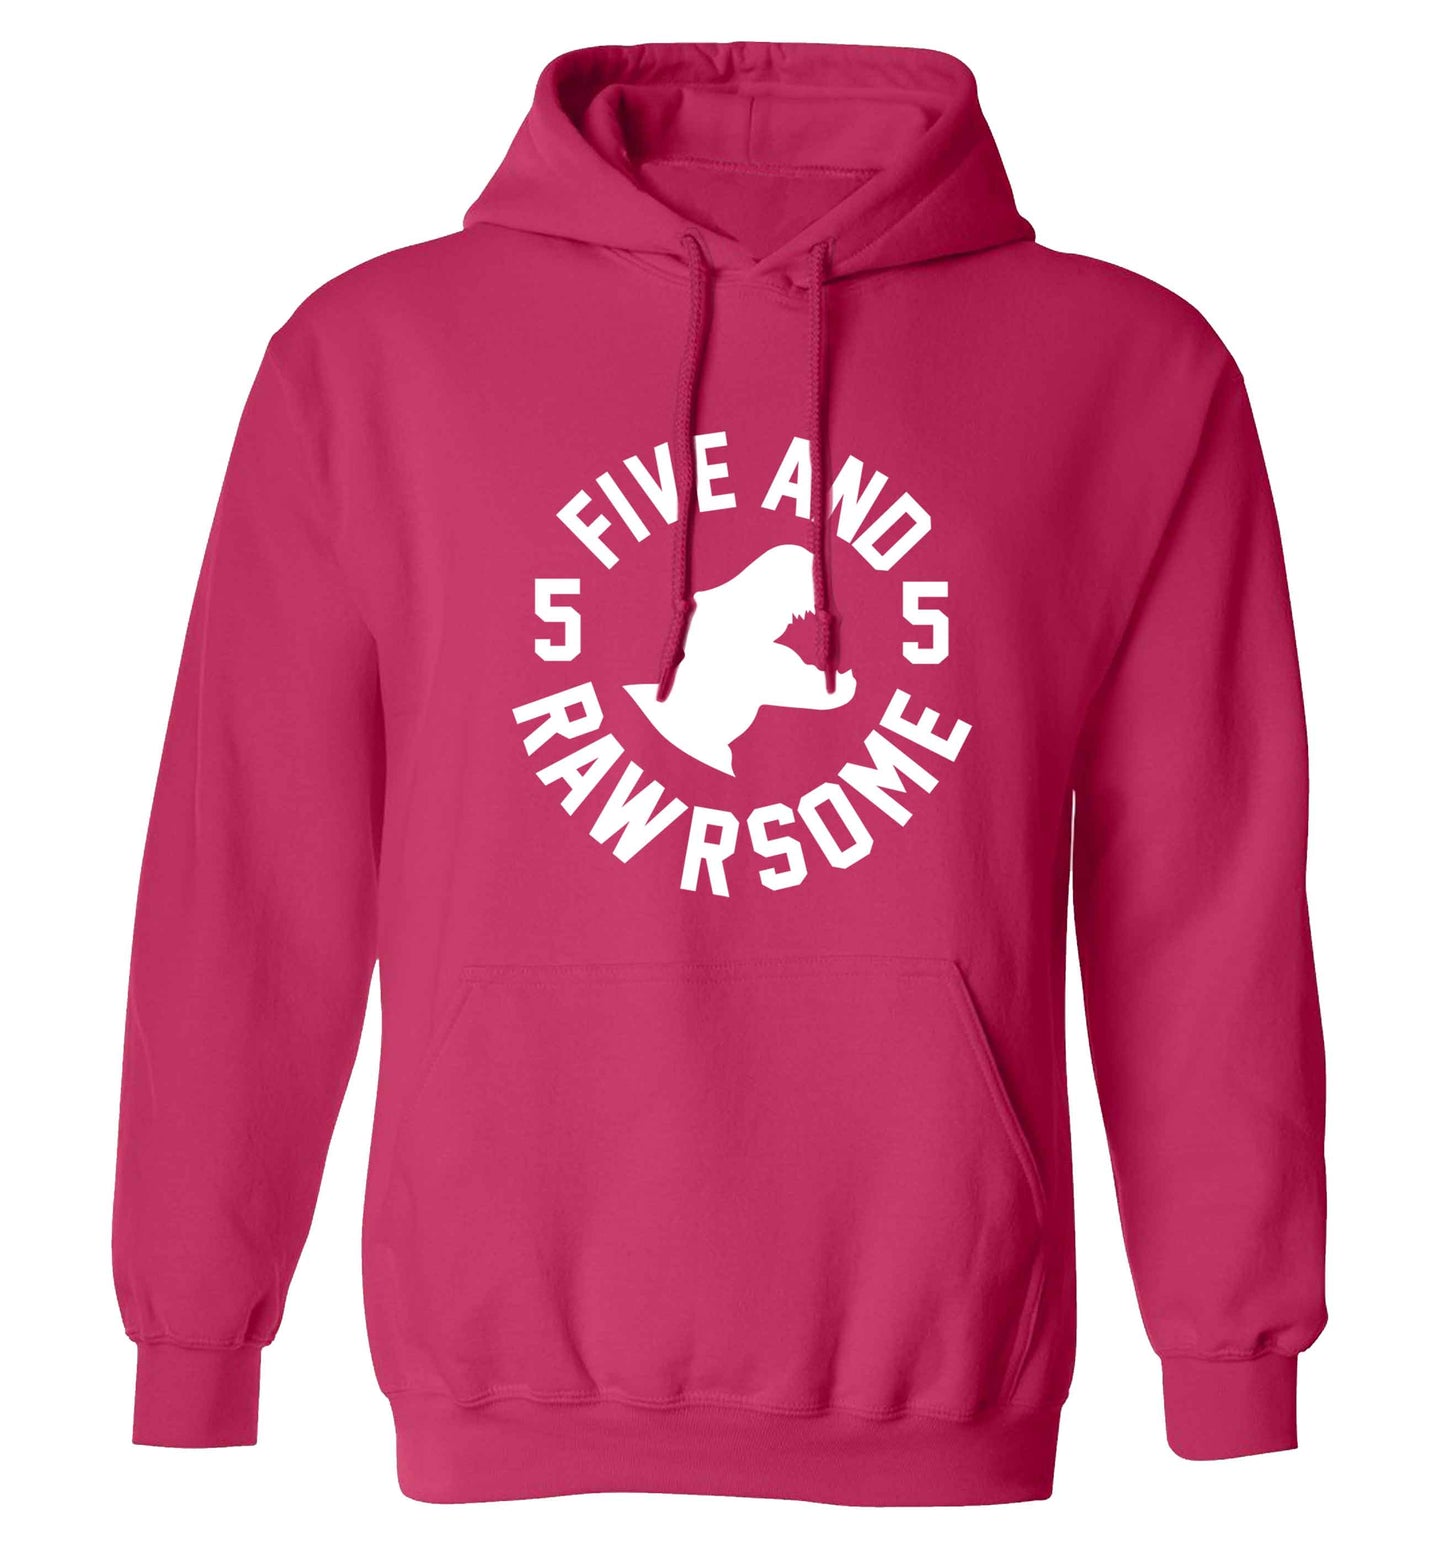 Five and rawrsome adults unisex pink hoodie 2XL